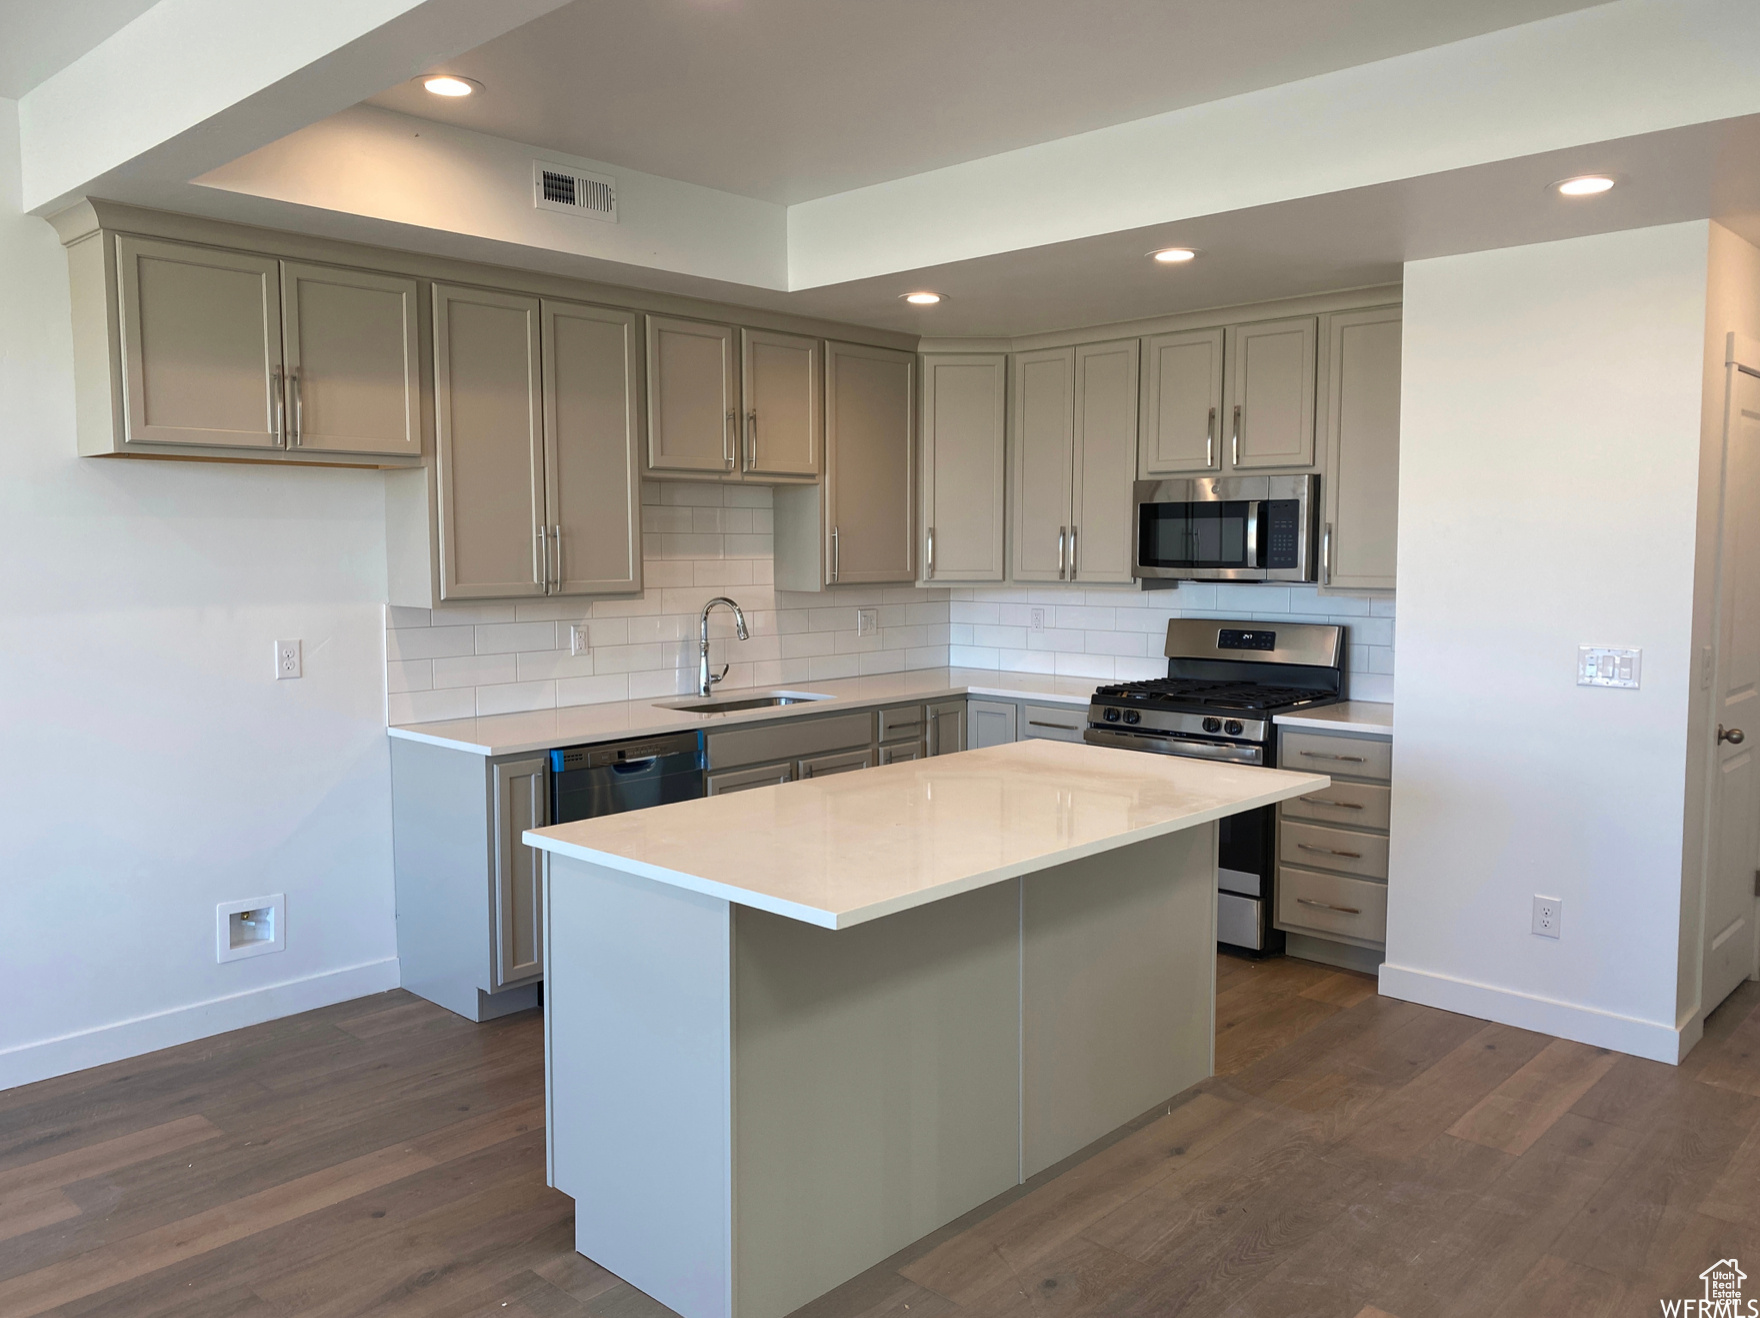 (previously built home as example) Kitchen featuring appliances with stainless steel finishes, a kitchen island, sink, tasteful backsplash, and dark hardwood / wood-style flooring